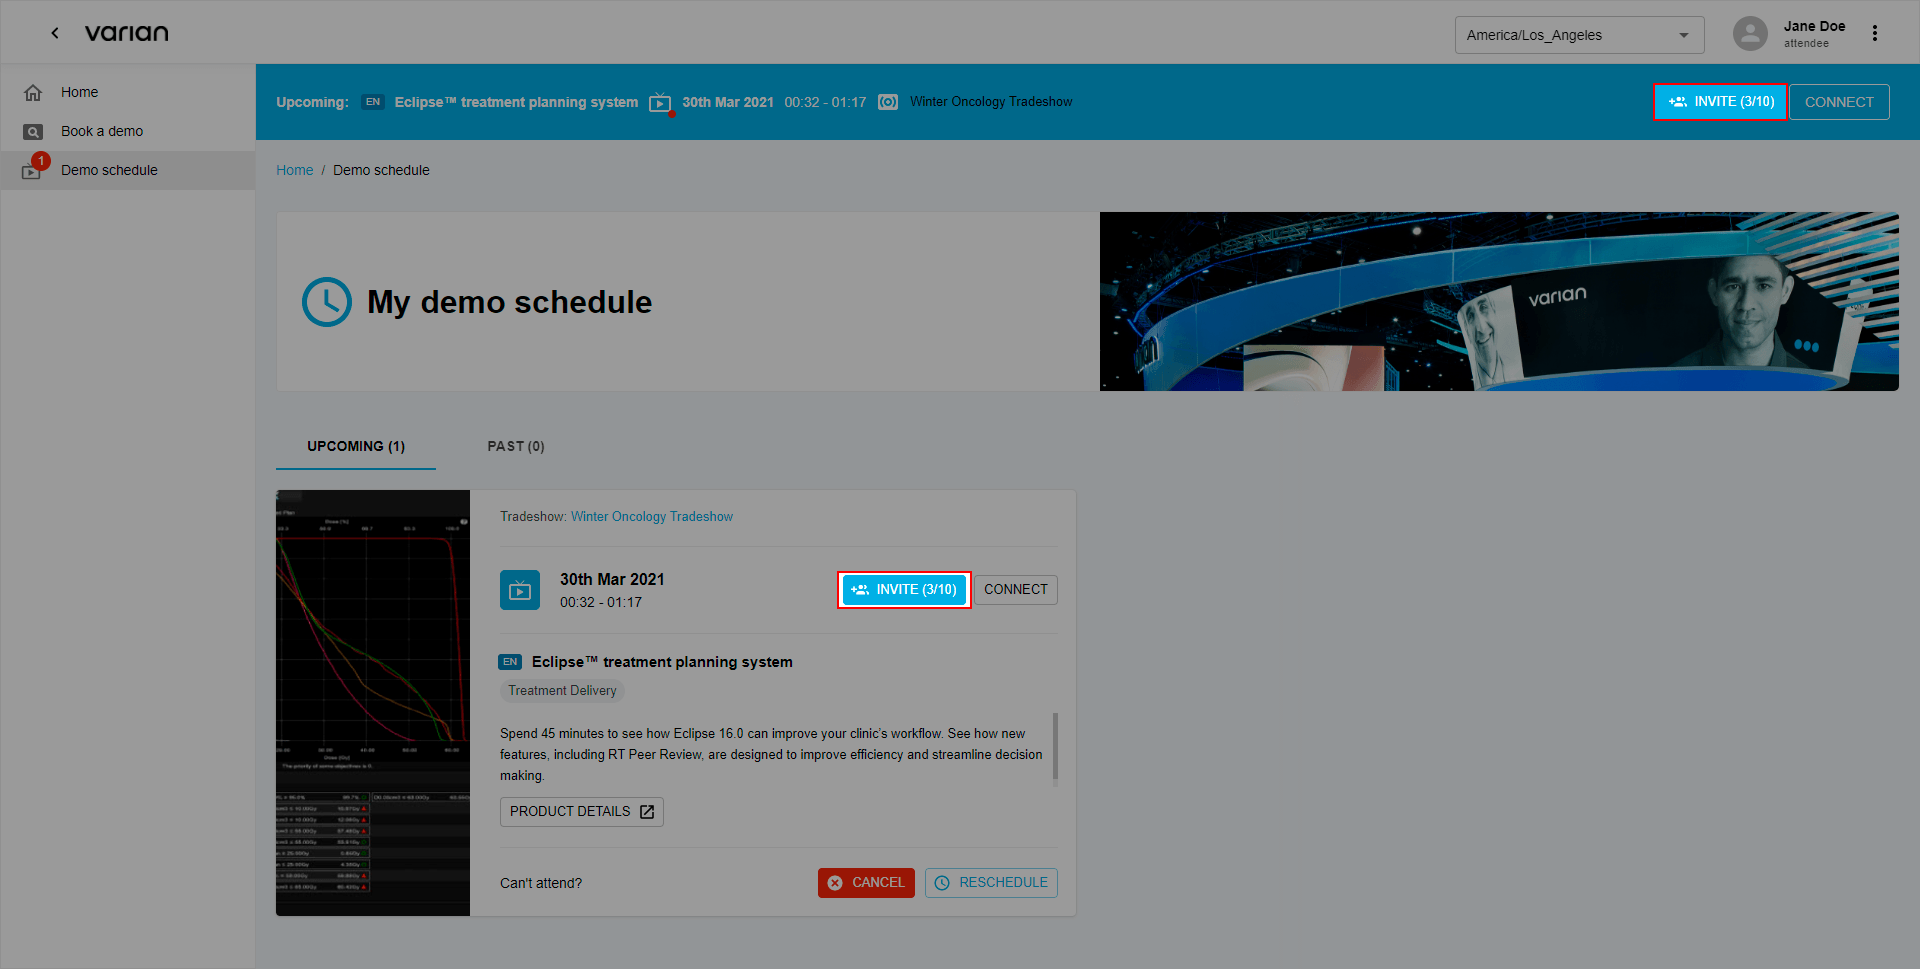 Click on one of the “Invite” buttons